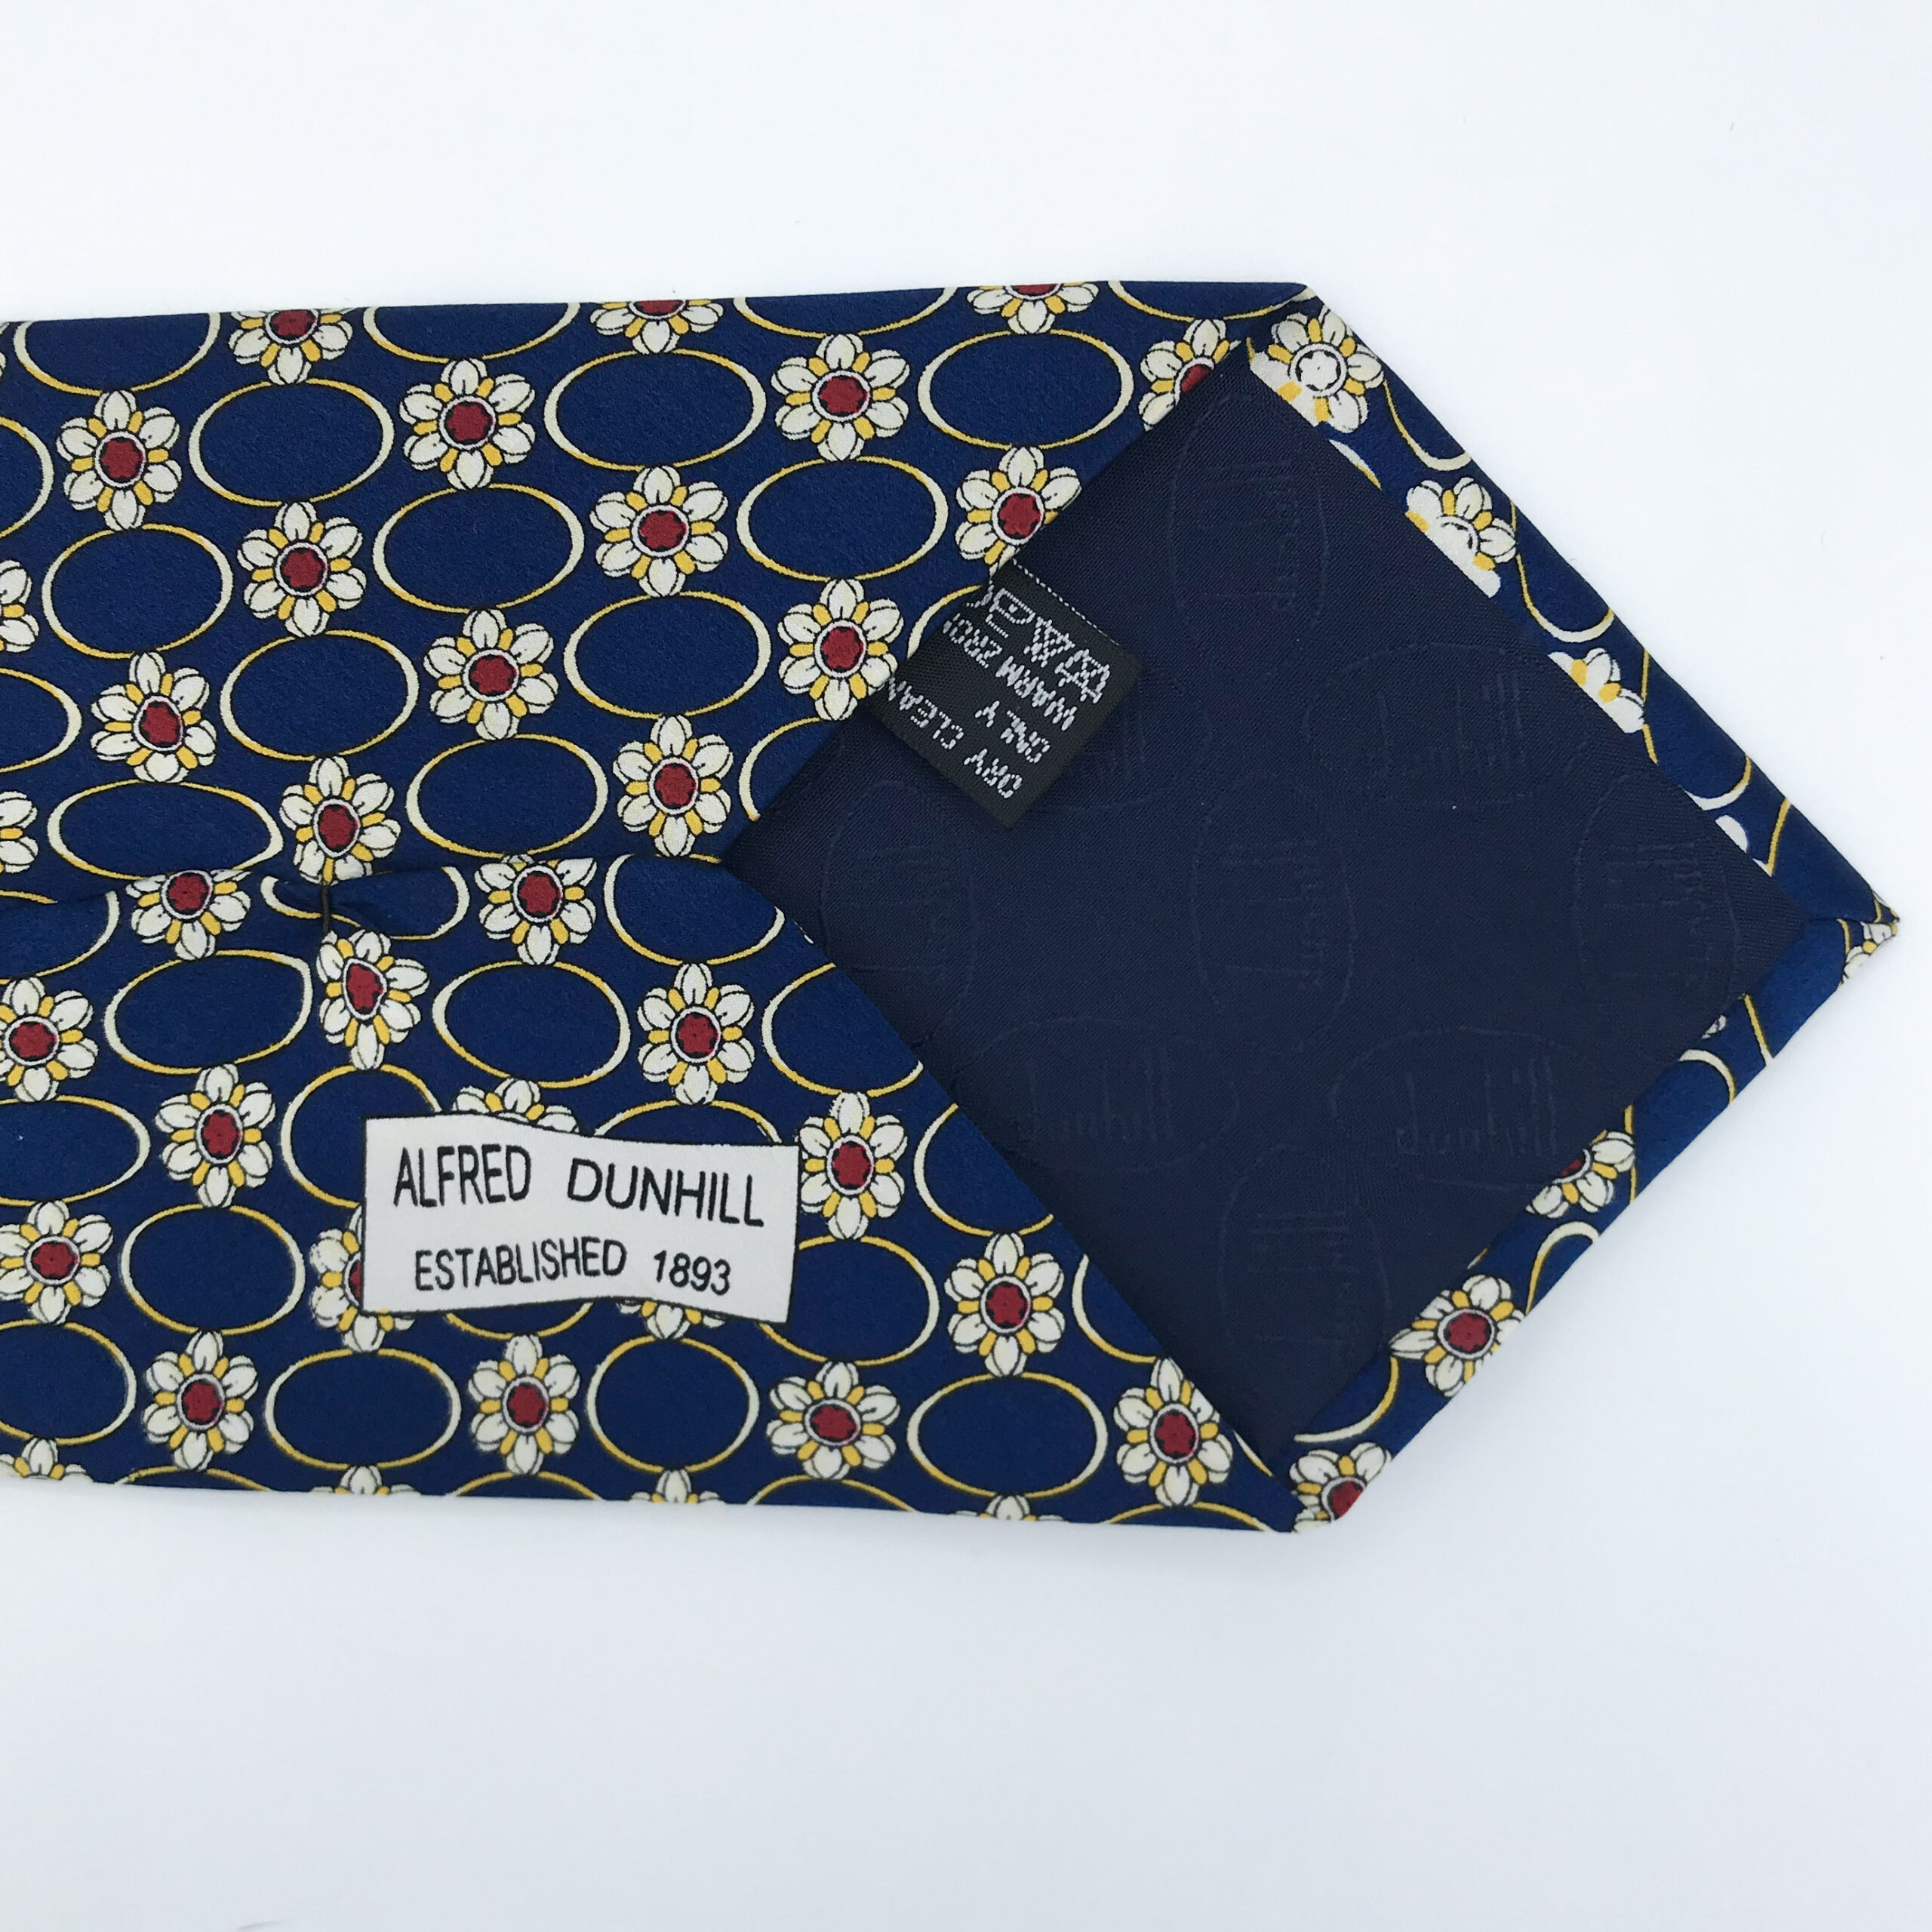 Alfred Dunhill Floral Tie